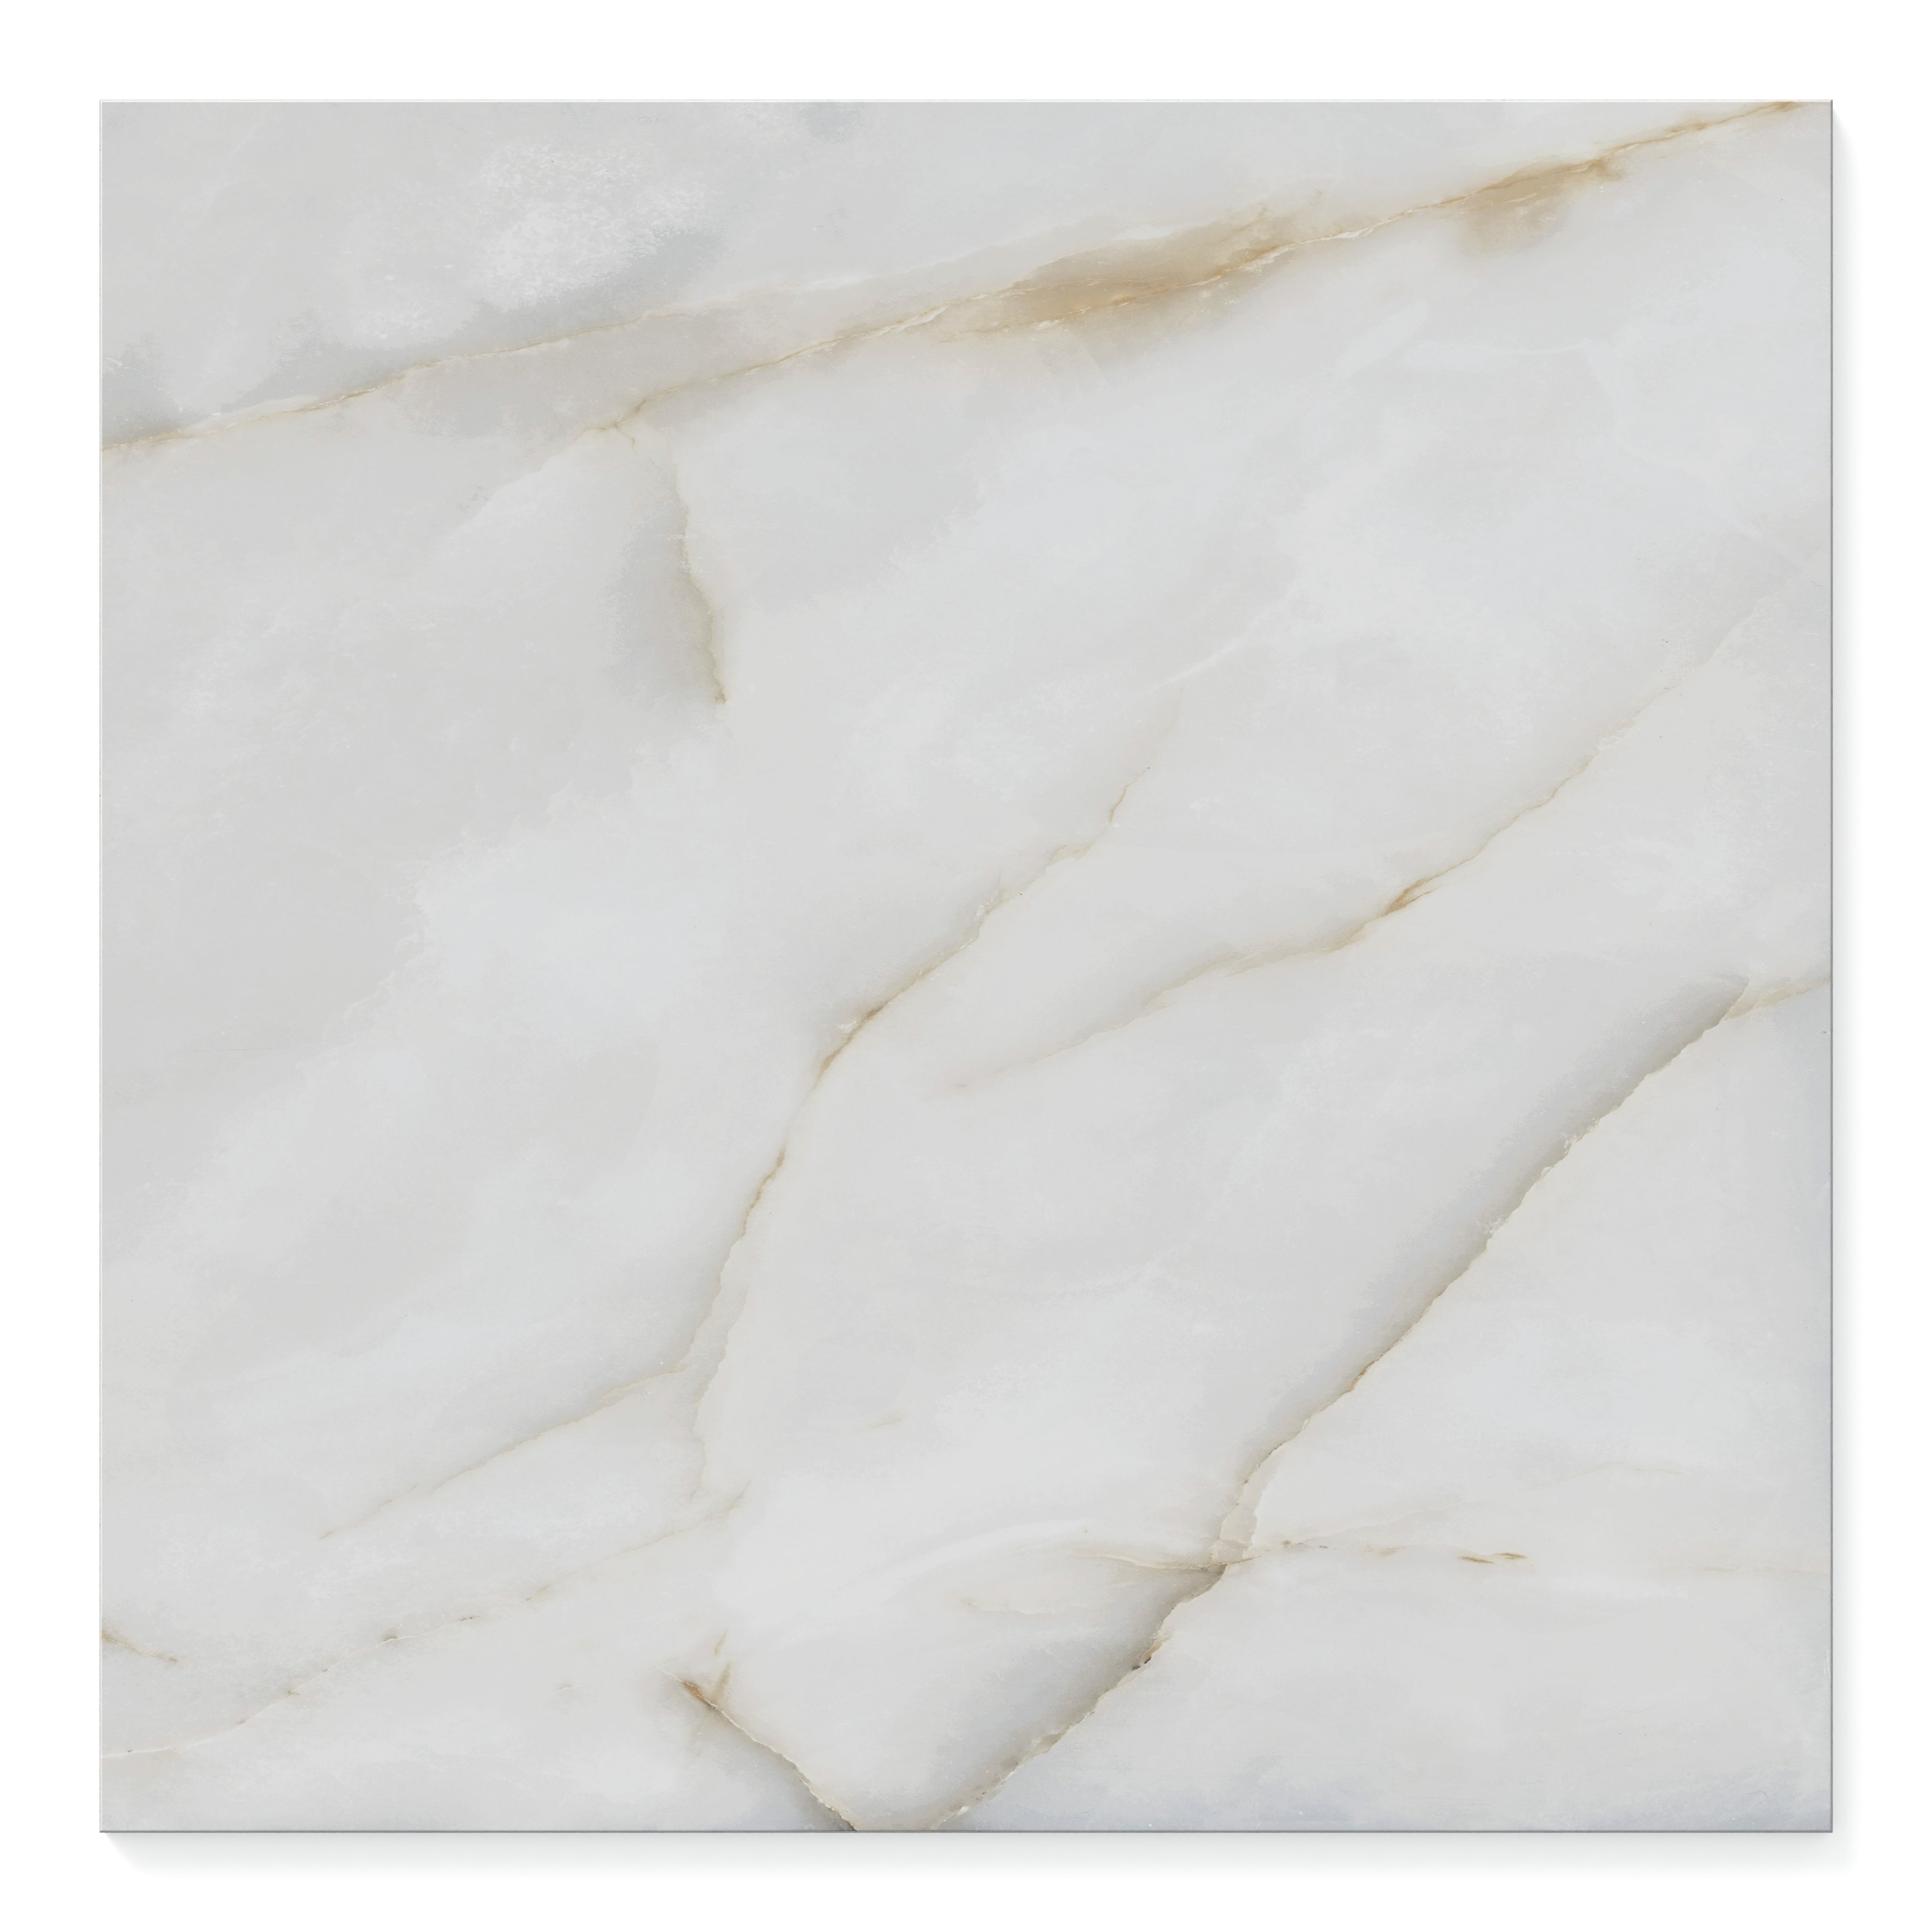 Astrid Pearl onyx-look porcelain tile exudes elegance in a light, airy setting.